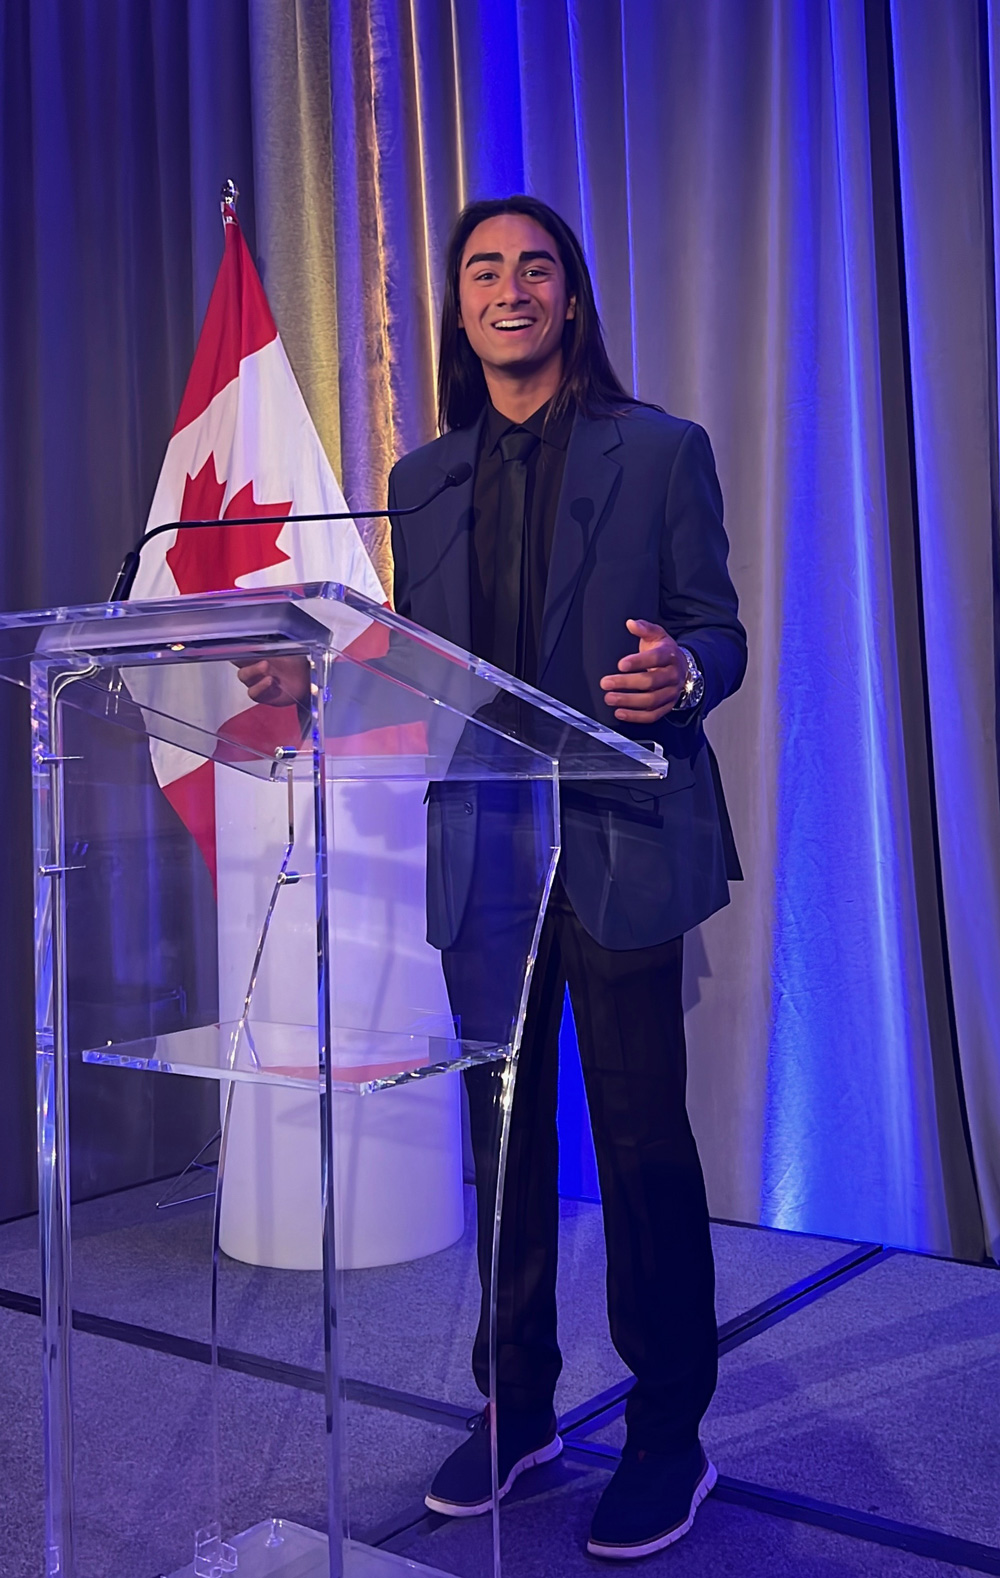 In May, Patil attended Canada’s Outstanding CEO of the Year Awards Gala in Toronto, where he was honoured with a Futures Fund Scholarship for Outstanding Leadership. Patil was one of 10 business students in Canada selected for the award, which recognizes exemplary leadership in academic and extracurricular pursuits.